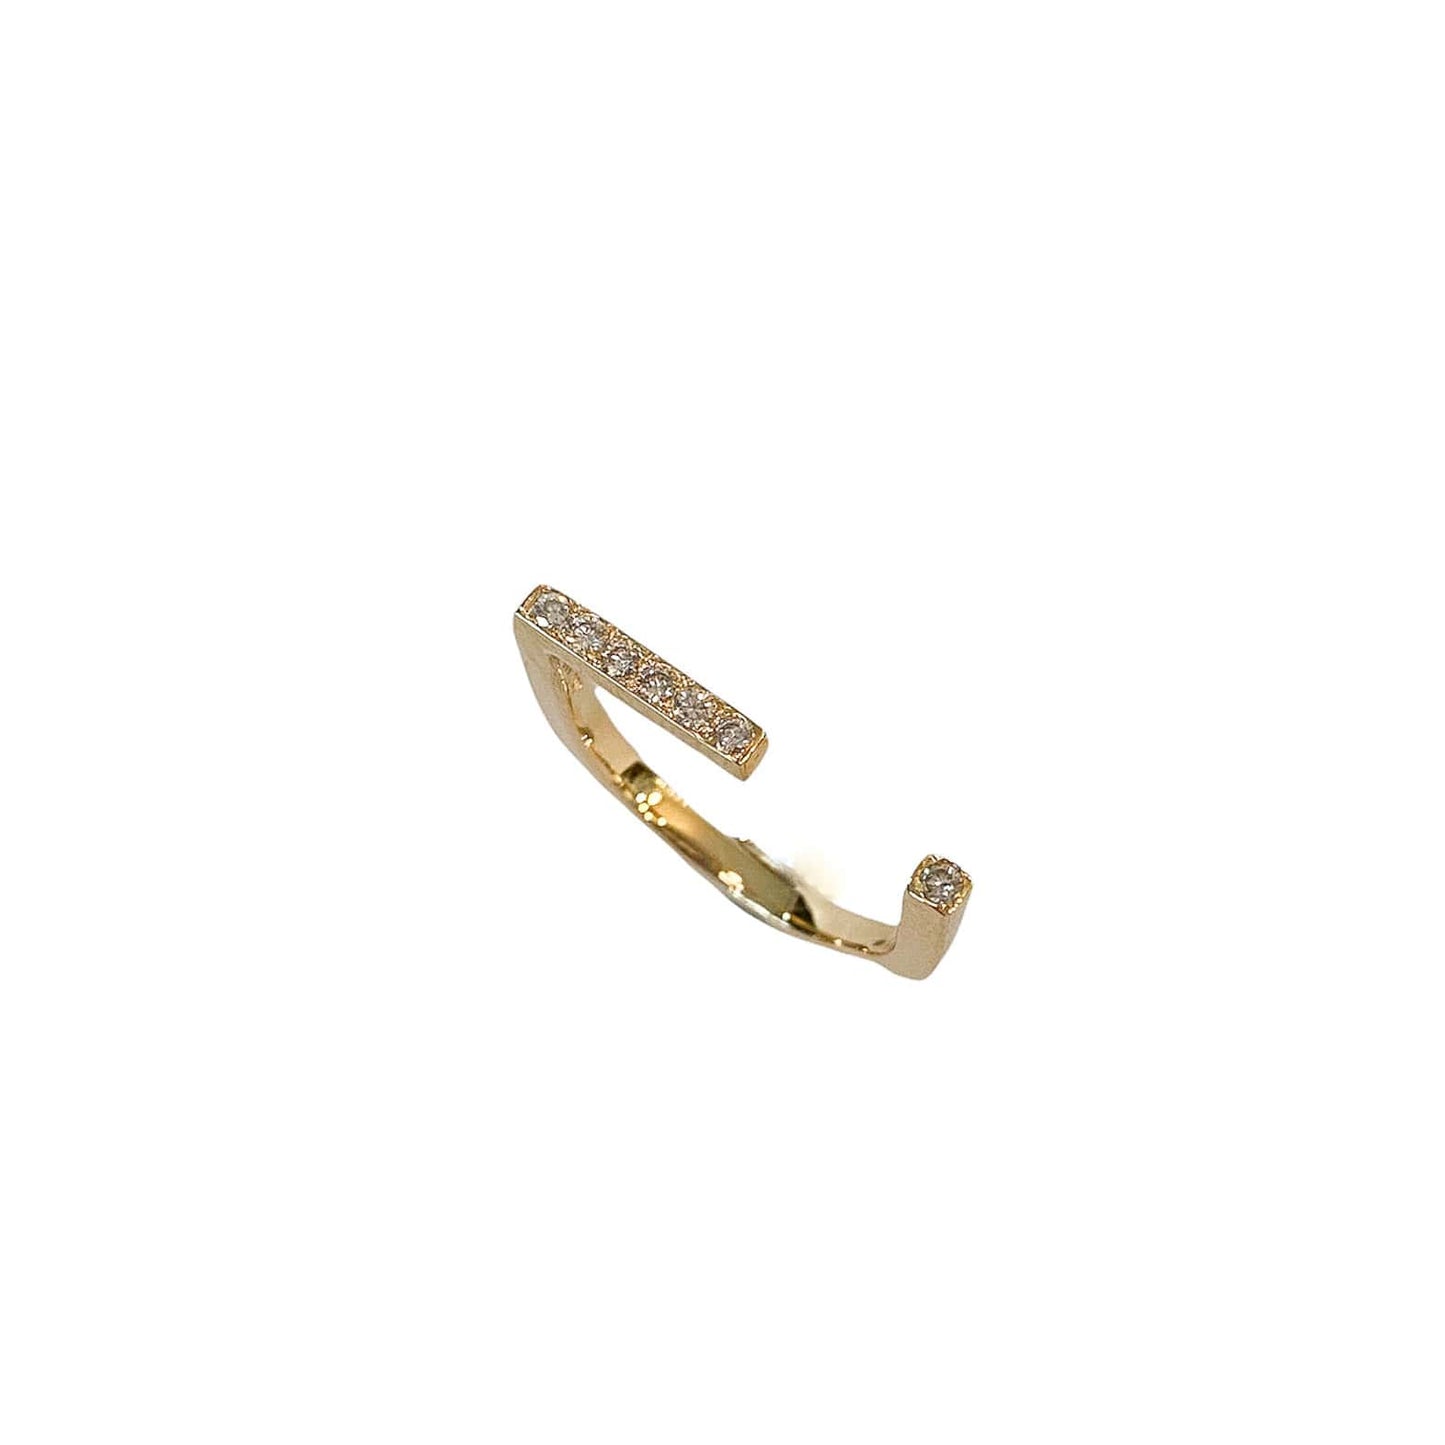 Rainbow 14 kt gold pave diamond ring, top view.